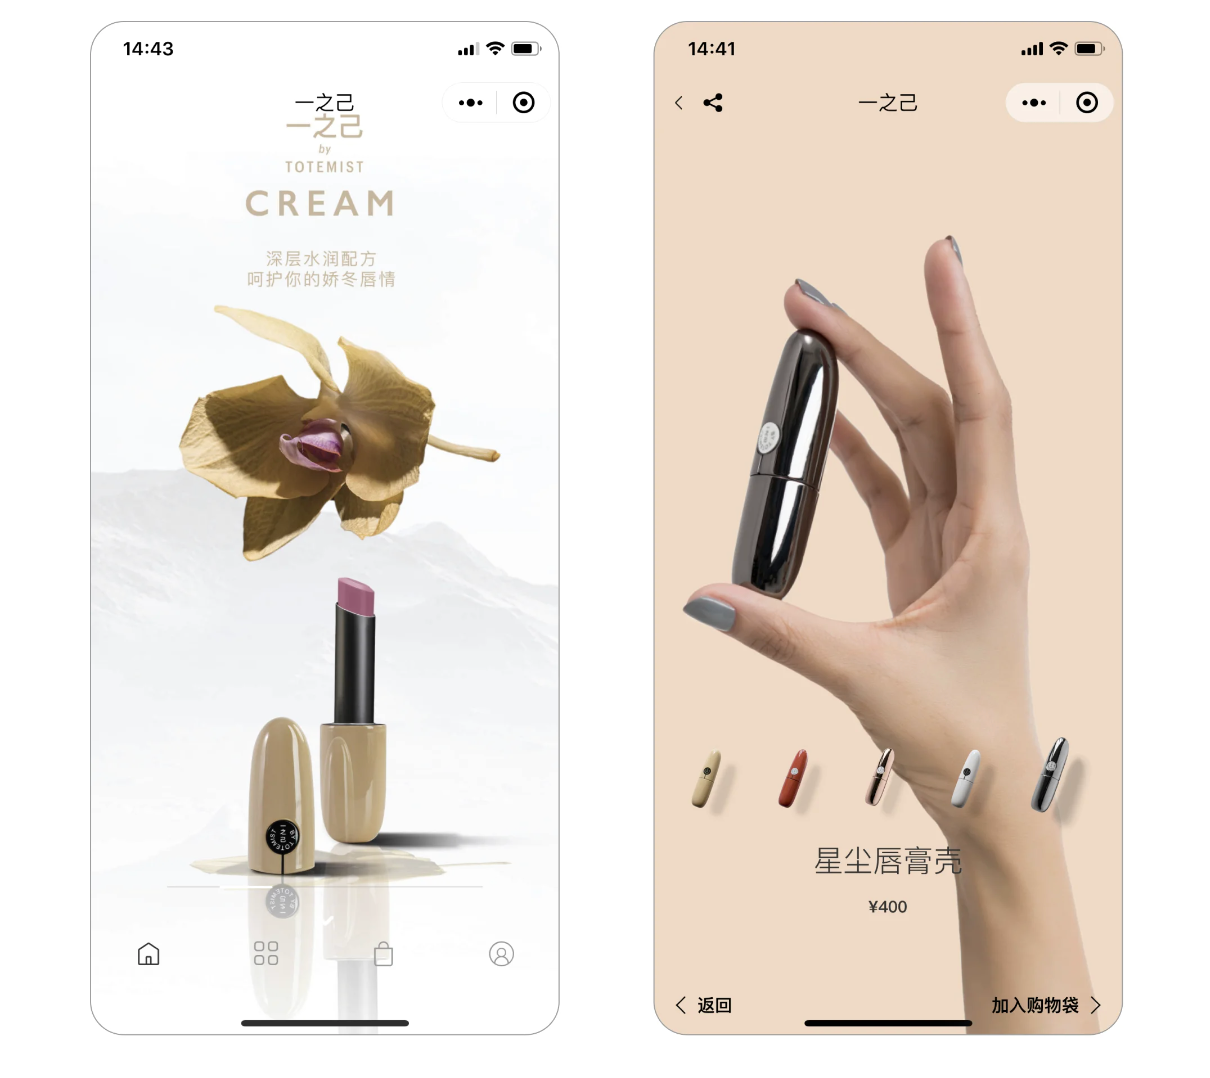 Totemist's NFC-connected lipstick directs wearers to a personalized WeChat channel. Photo: Totemist